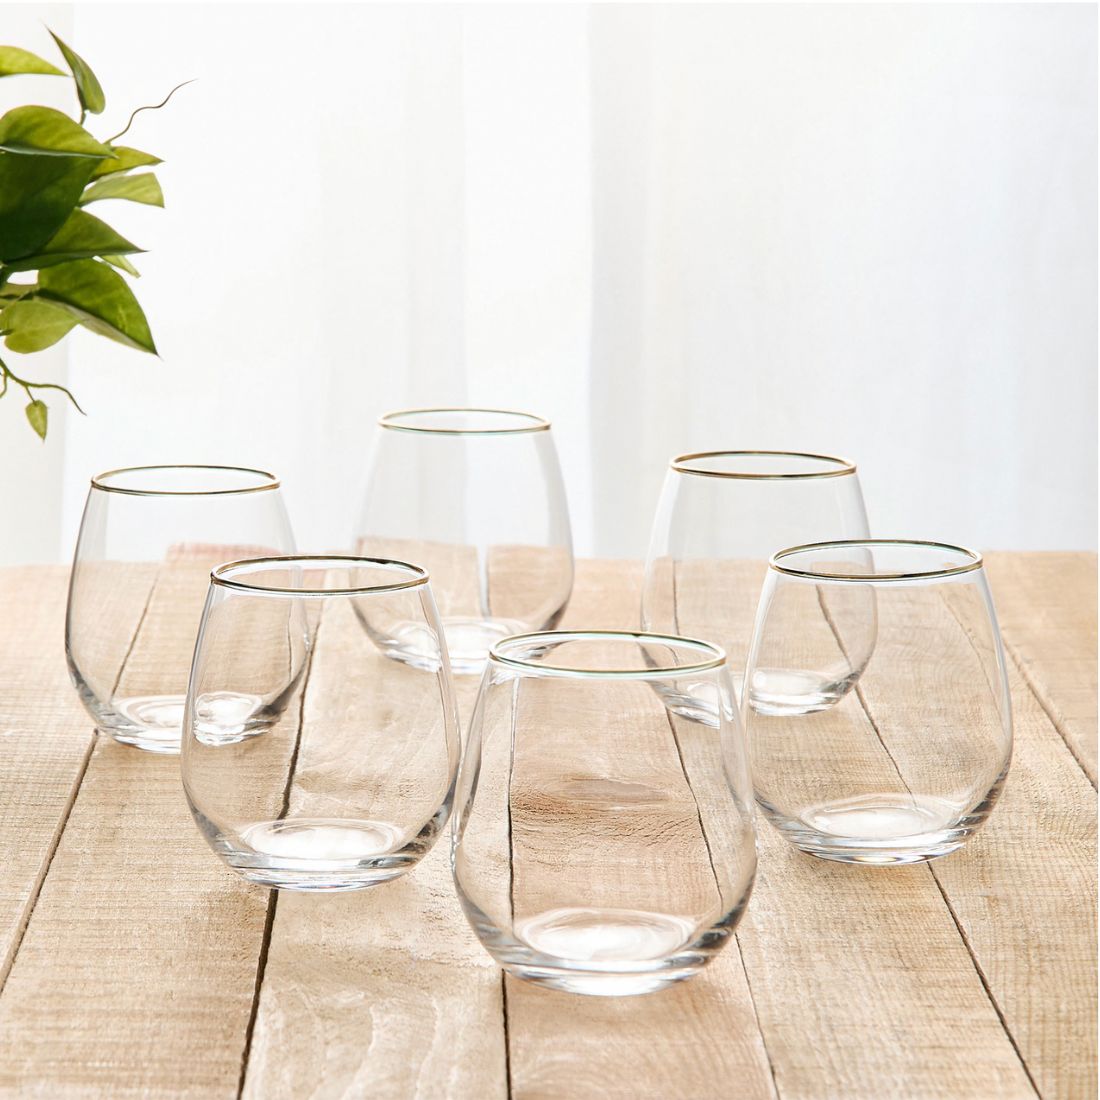 Short Glasses with Gold Rim